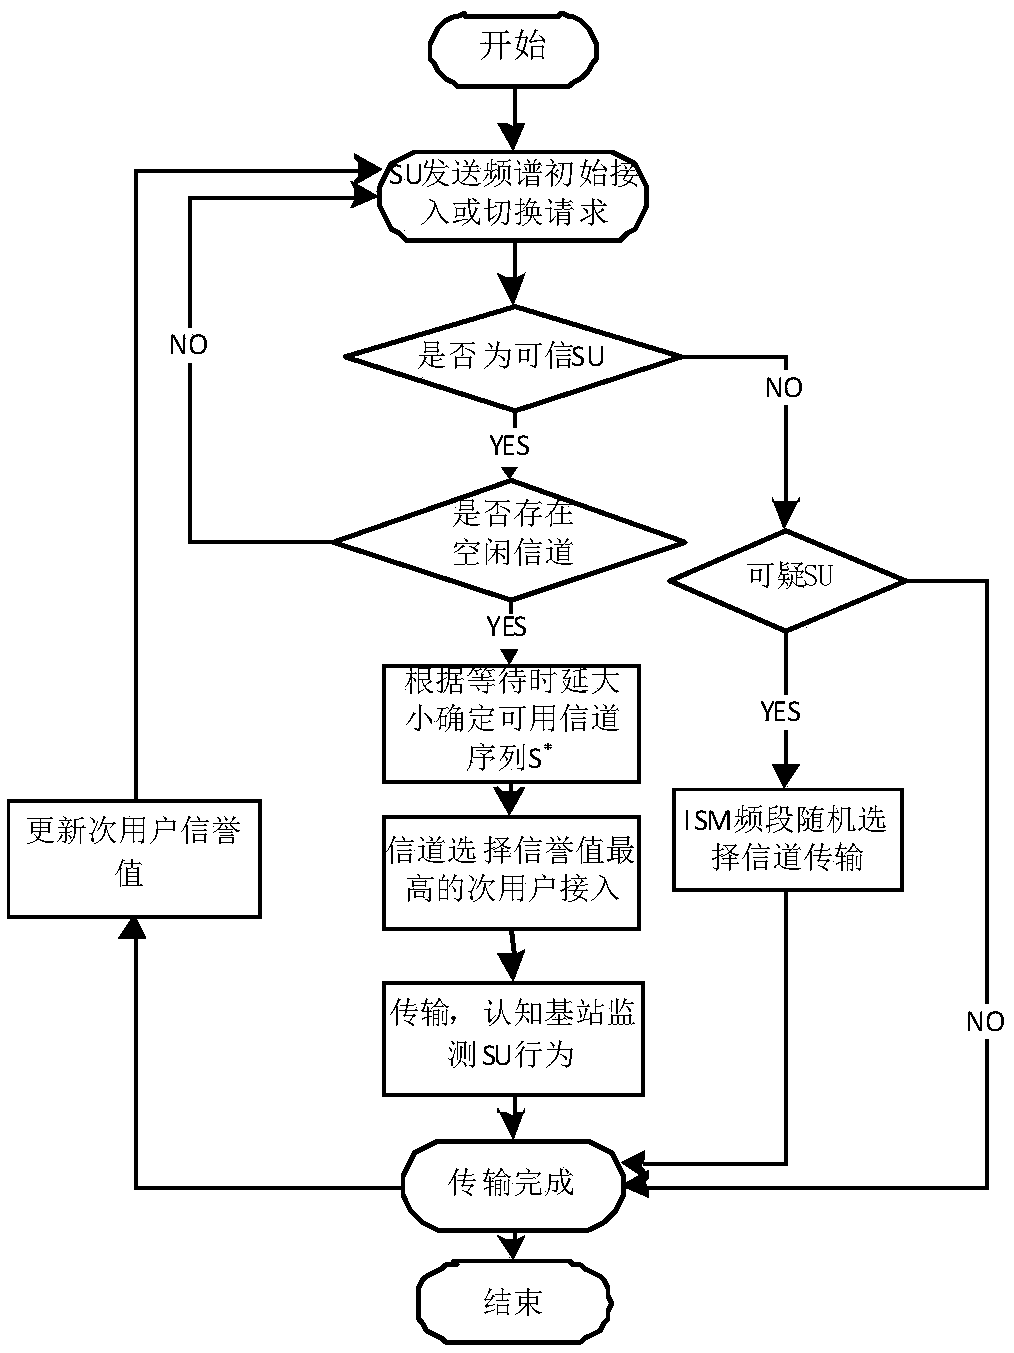 Spectrum switching method based on reputation system in cognitive heterogeneous wireless network